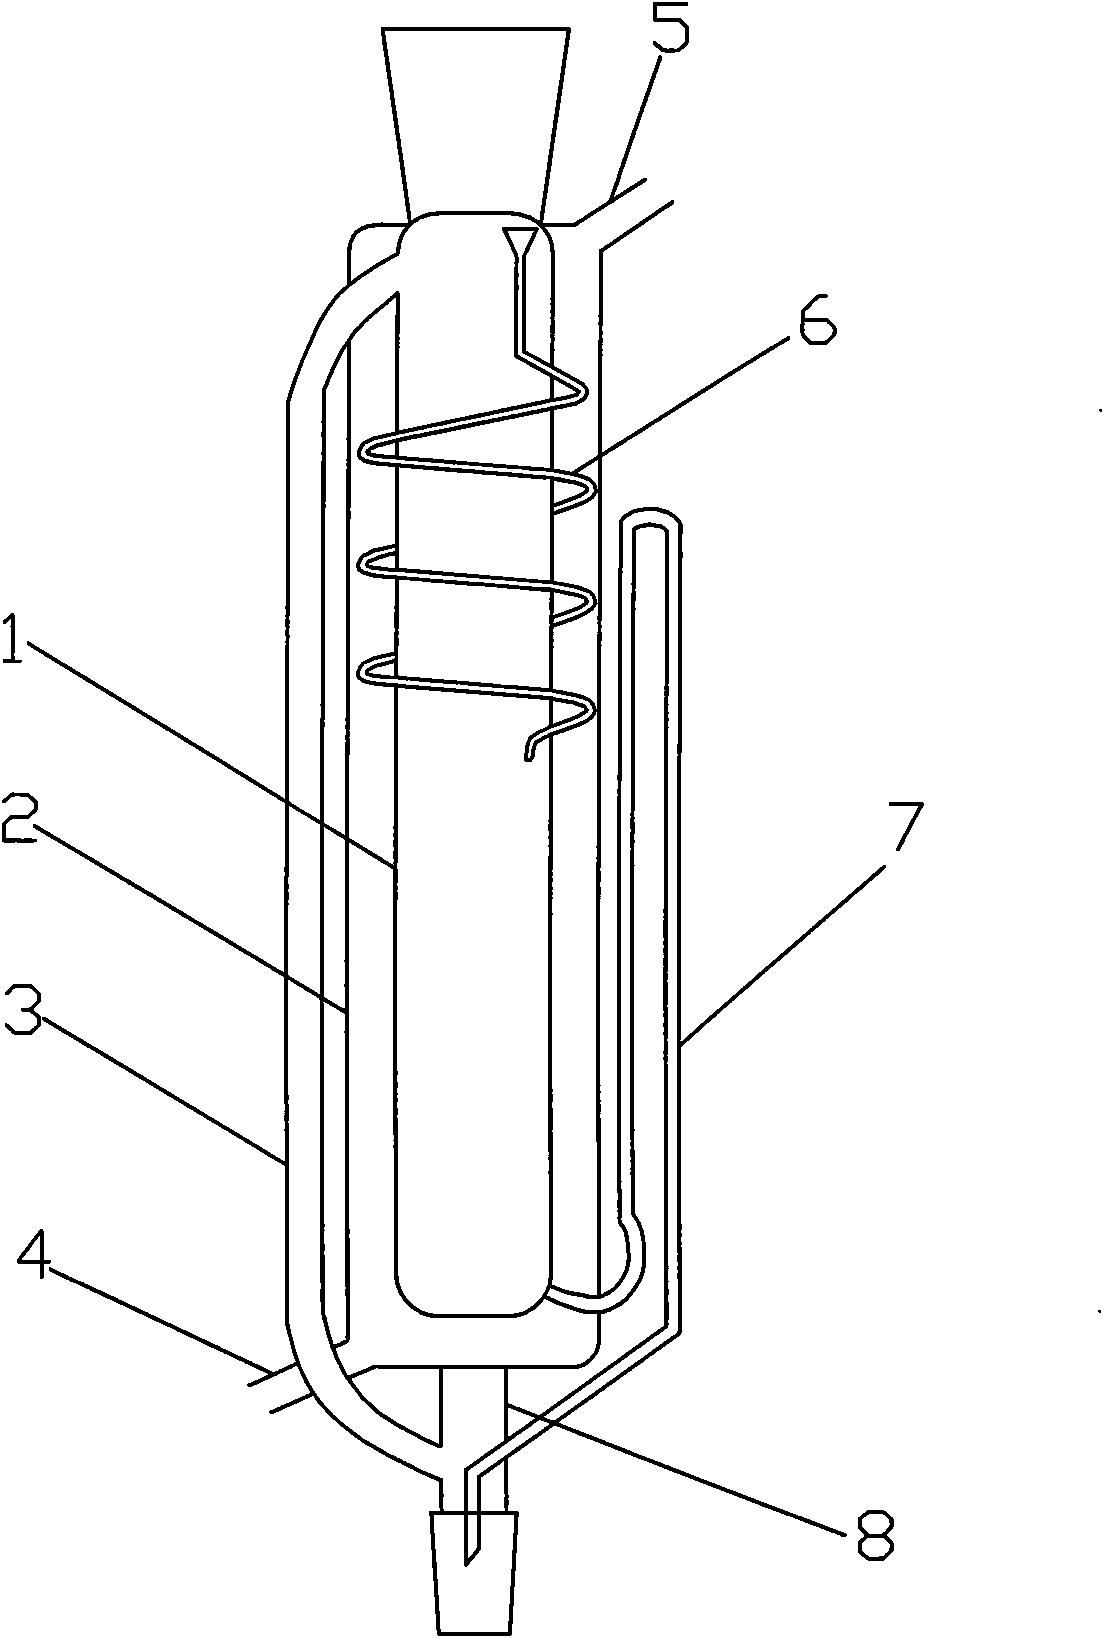 Temperature controlled Soxhlet extractor